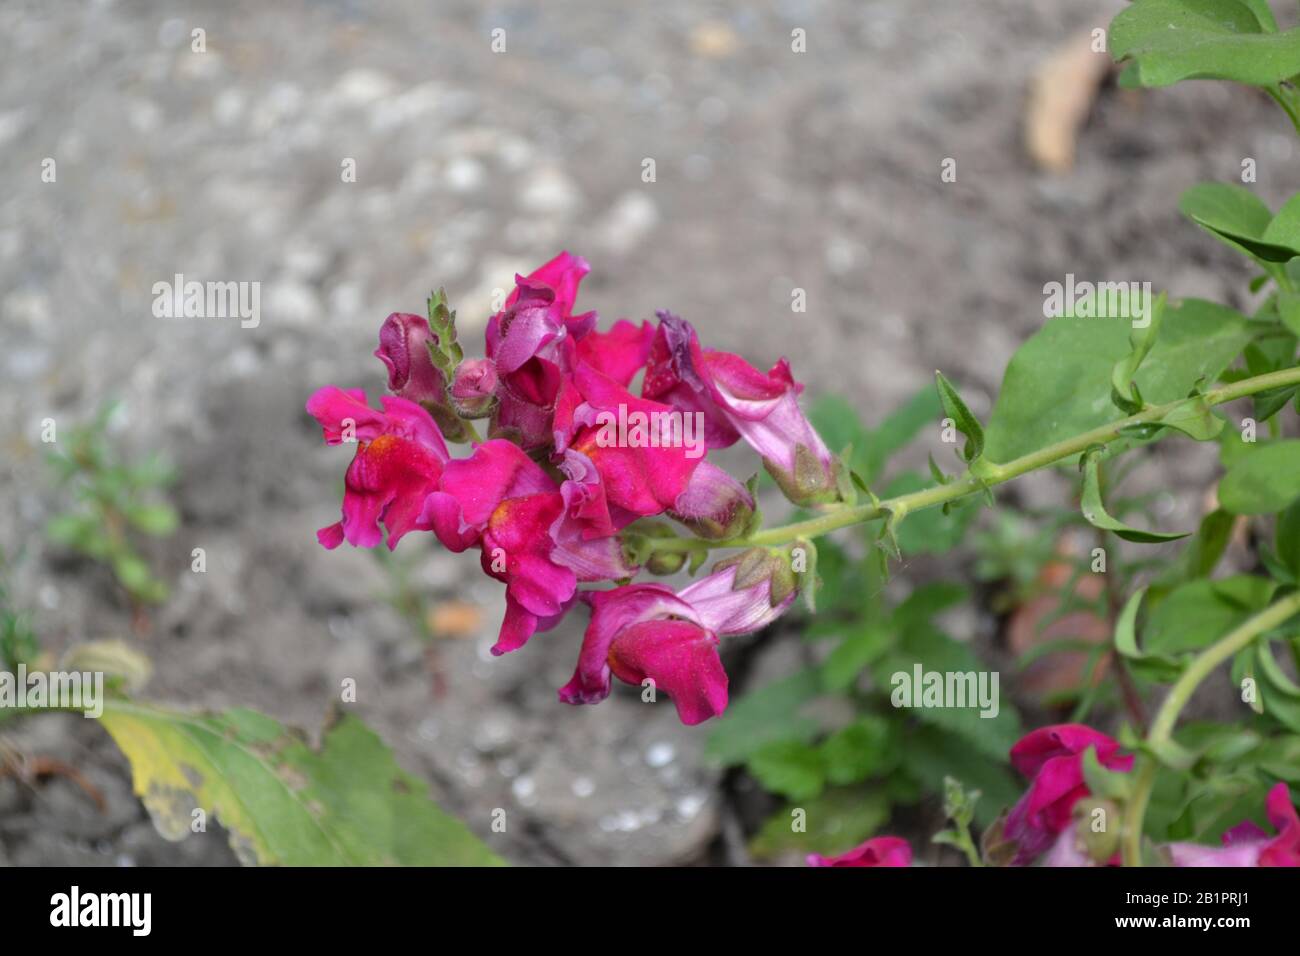 Snapdragon. Antirrhinum. Perennial. Beautiful unusual flower. Inflorescences of fuchsia-colored. Garden. A flower bed. Green leaves. Horizontal photo Stock Photo